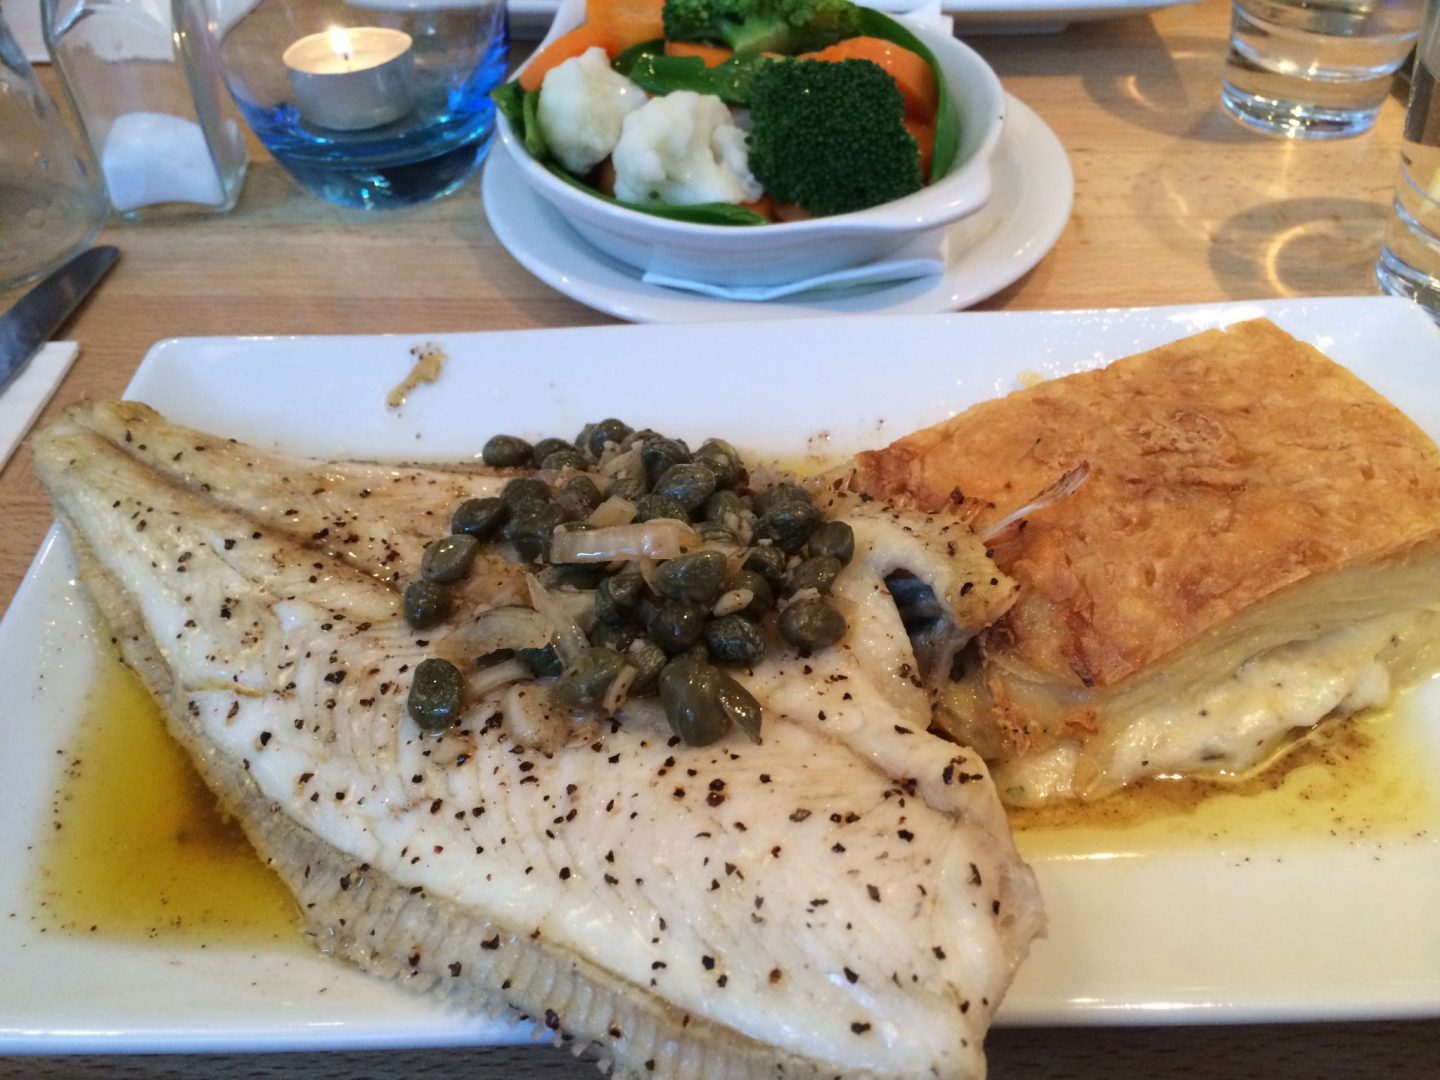 Sole and potato dauphinoise at the Seafood Cafe, Cornwall